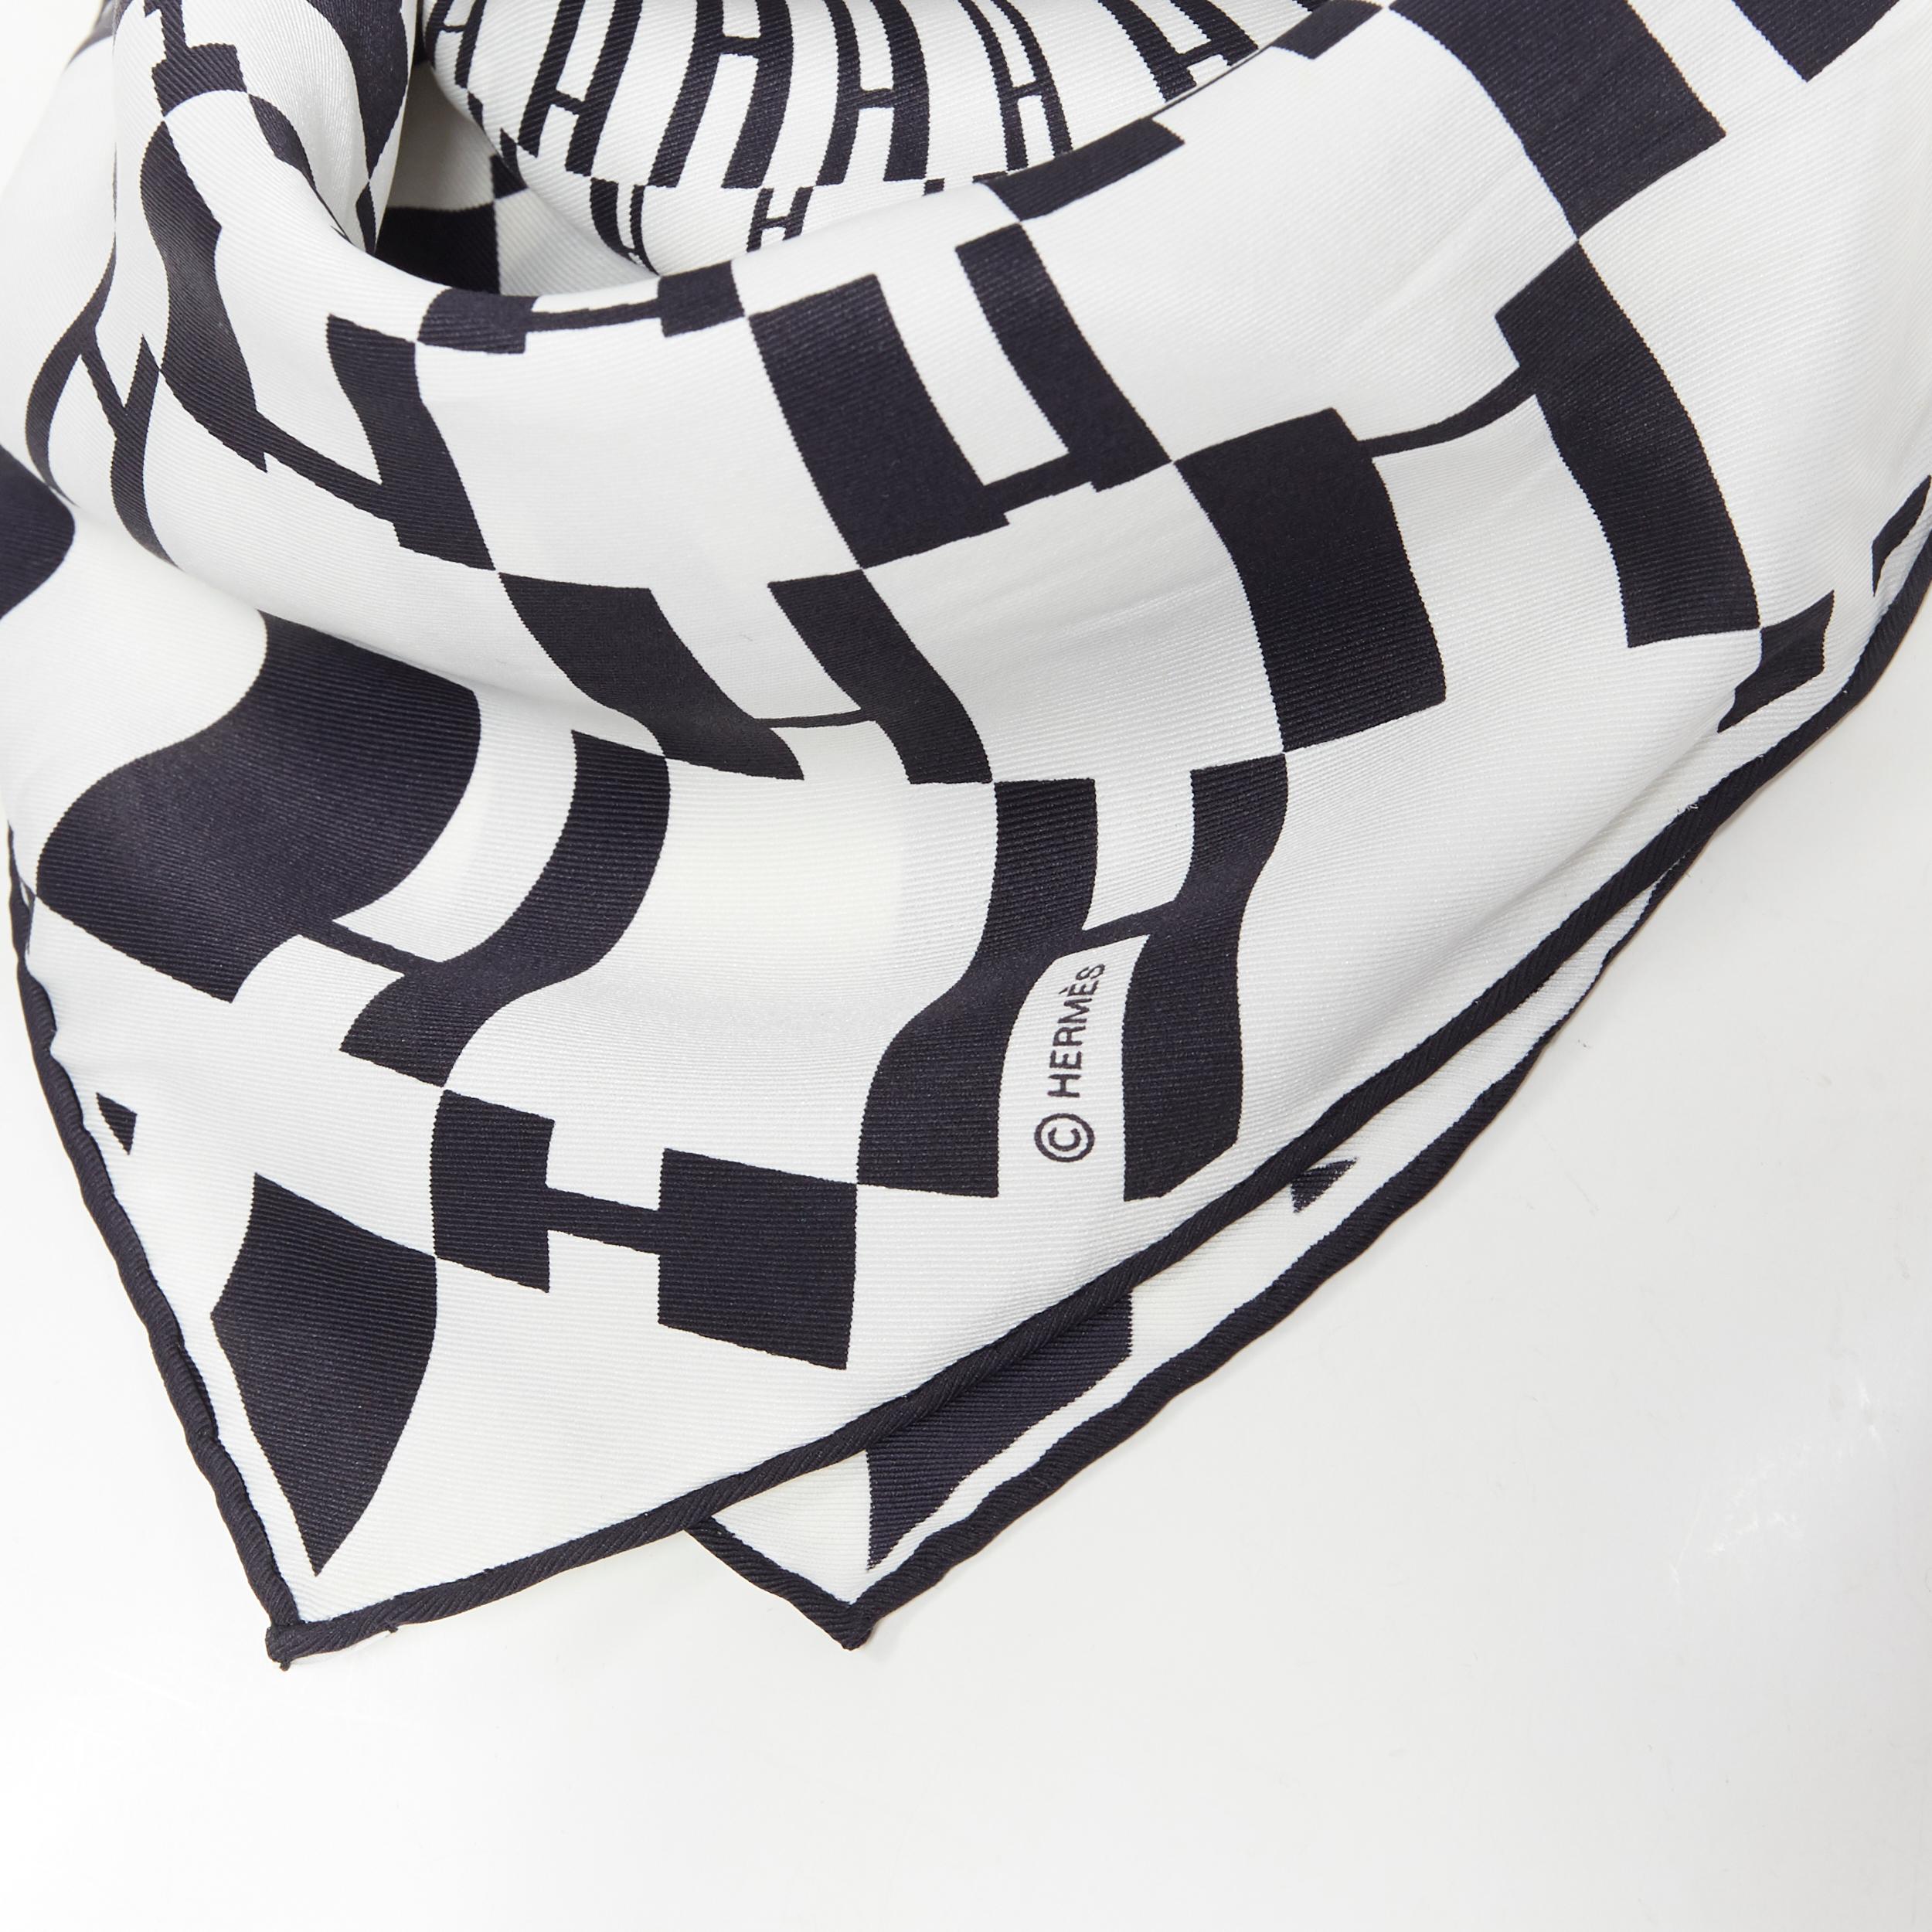 HERMES 100% silk black white geometric H silk print square handkerchief scarf
Brand: Hermes
Model Name / Style: Silk scarf
Material: Silk
Color: White
Pattern: Geometric
Made in: France

CONDITION: 
Condition: Excellent, this item was pre-owned and